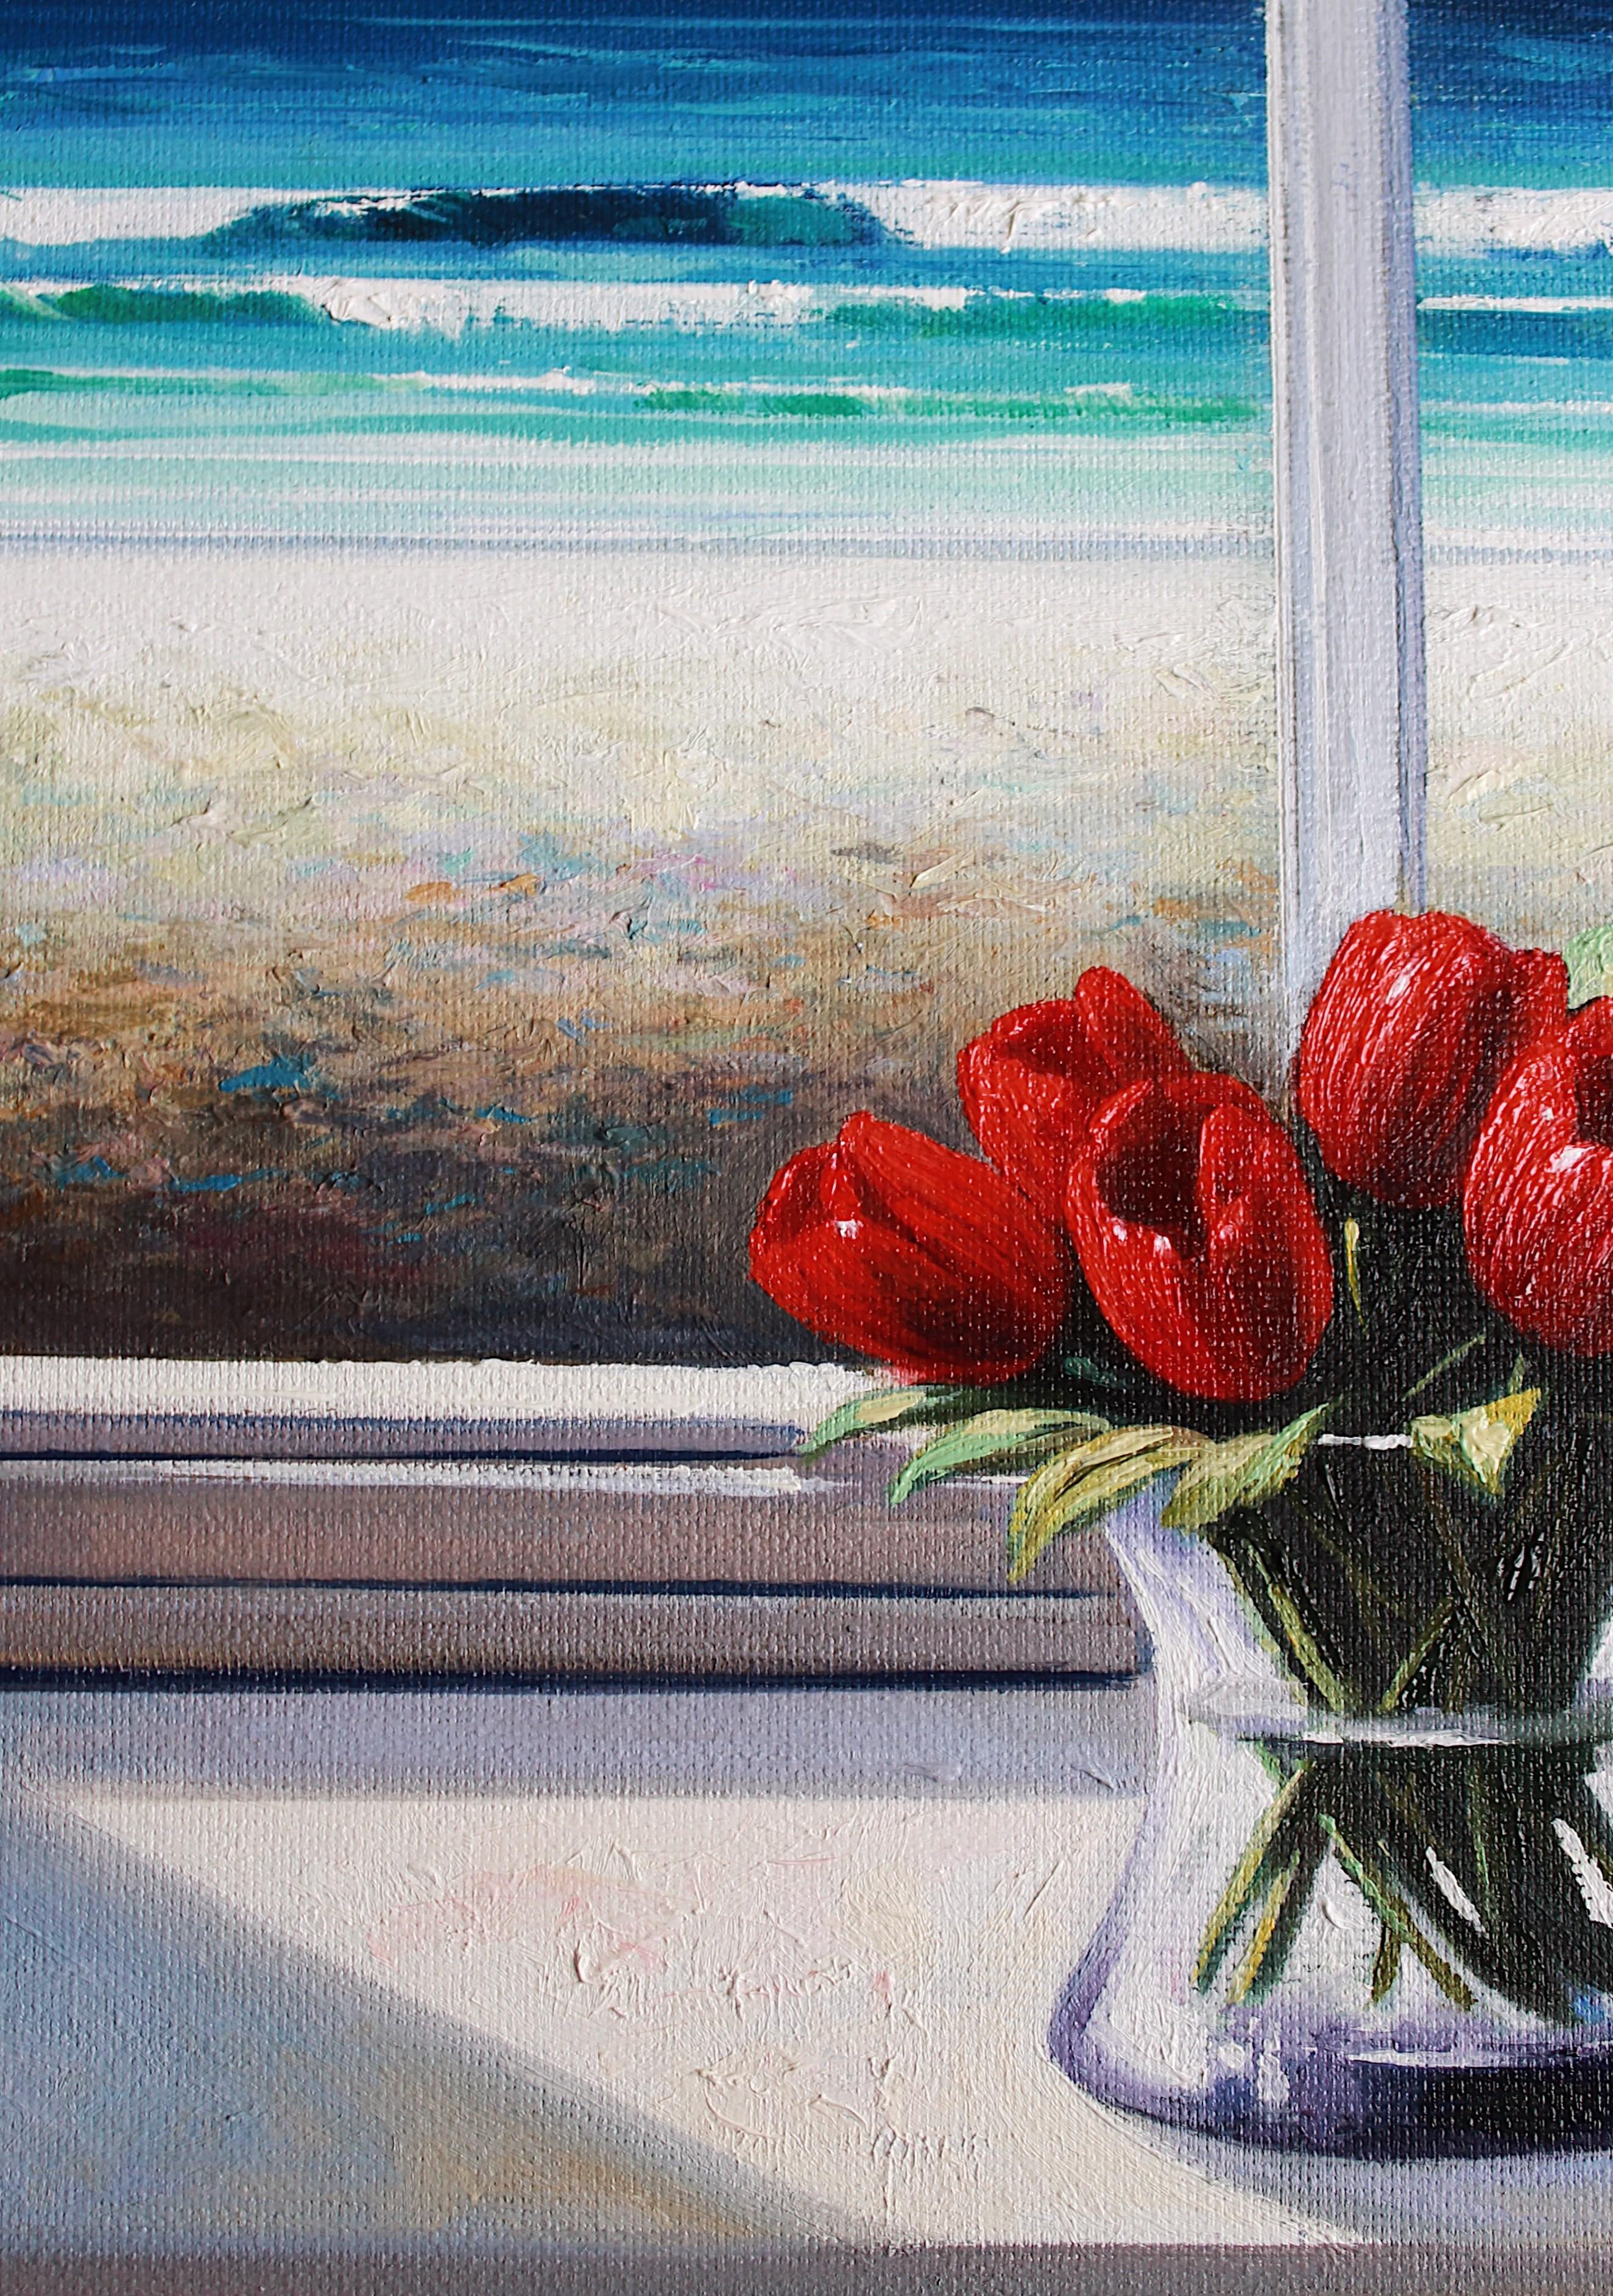 Seaview with tulips - Painting by Luis Fuentes